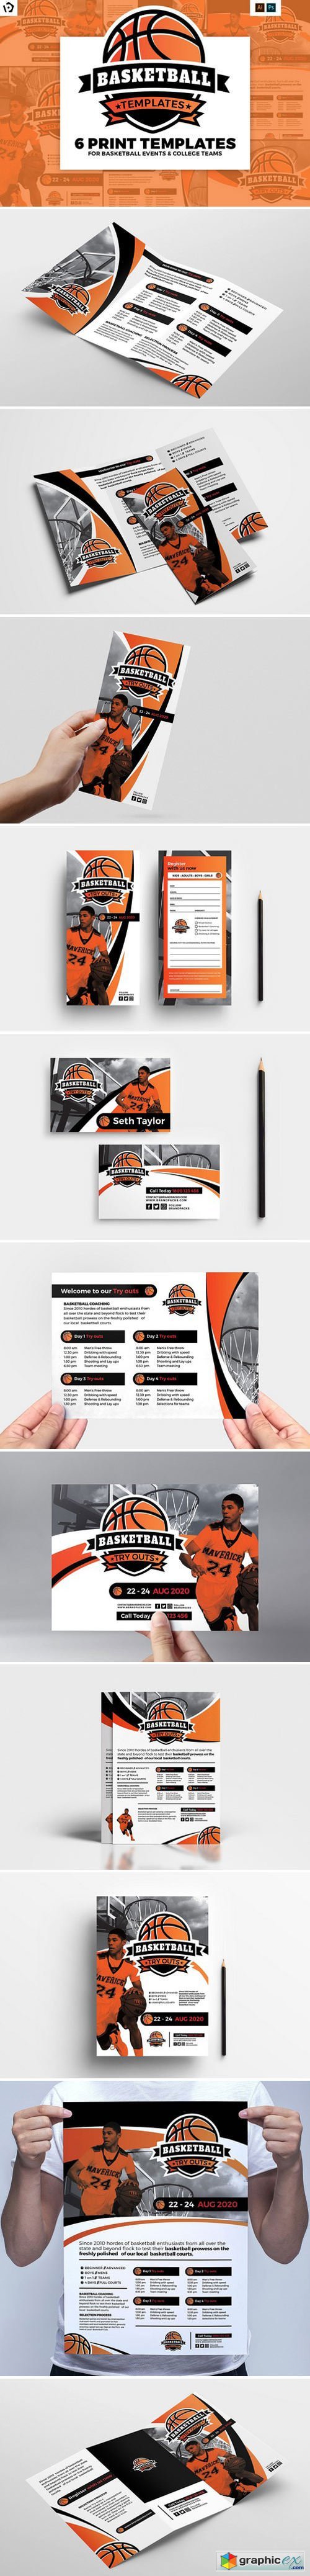 Basketball Templates Pack